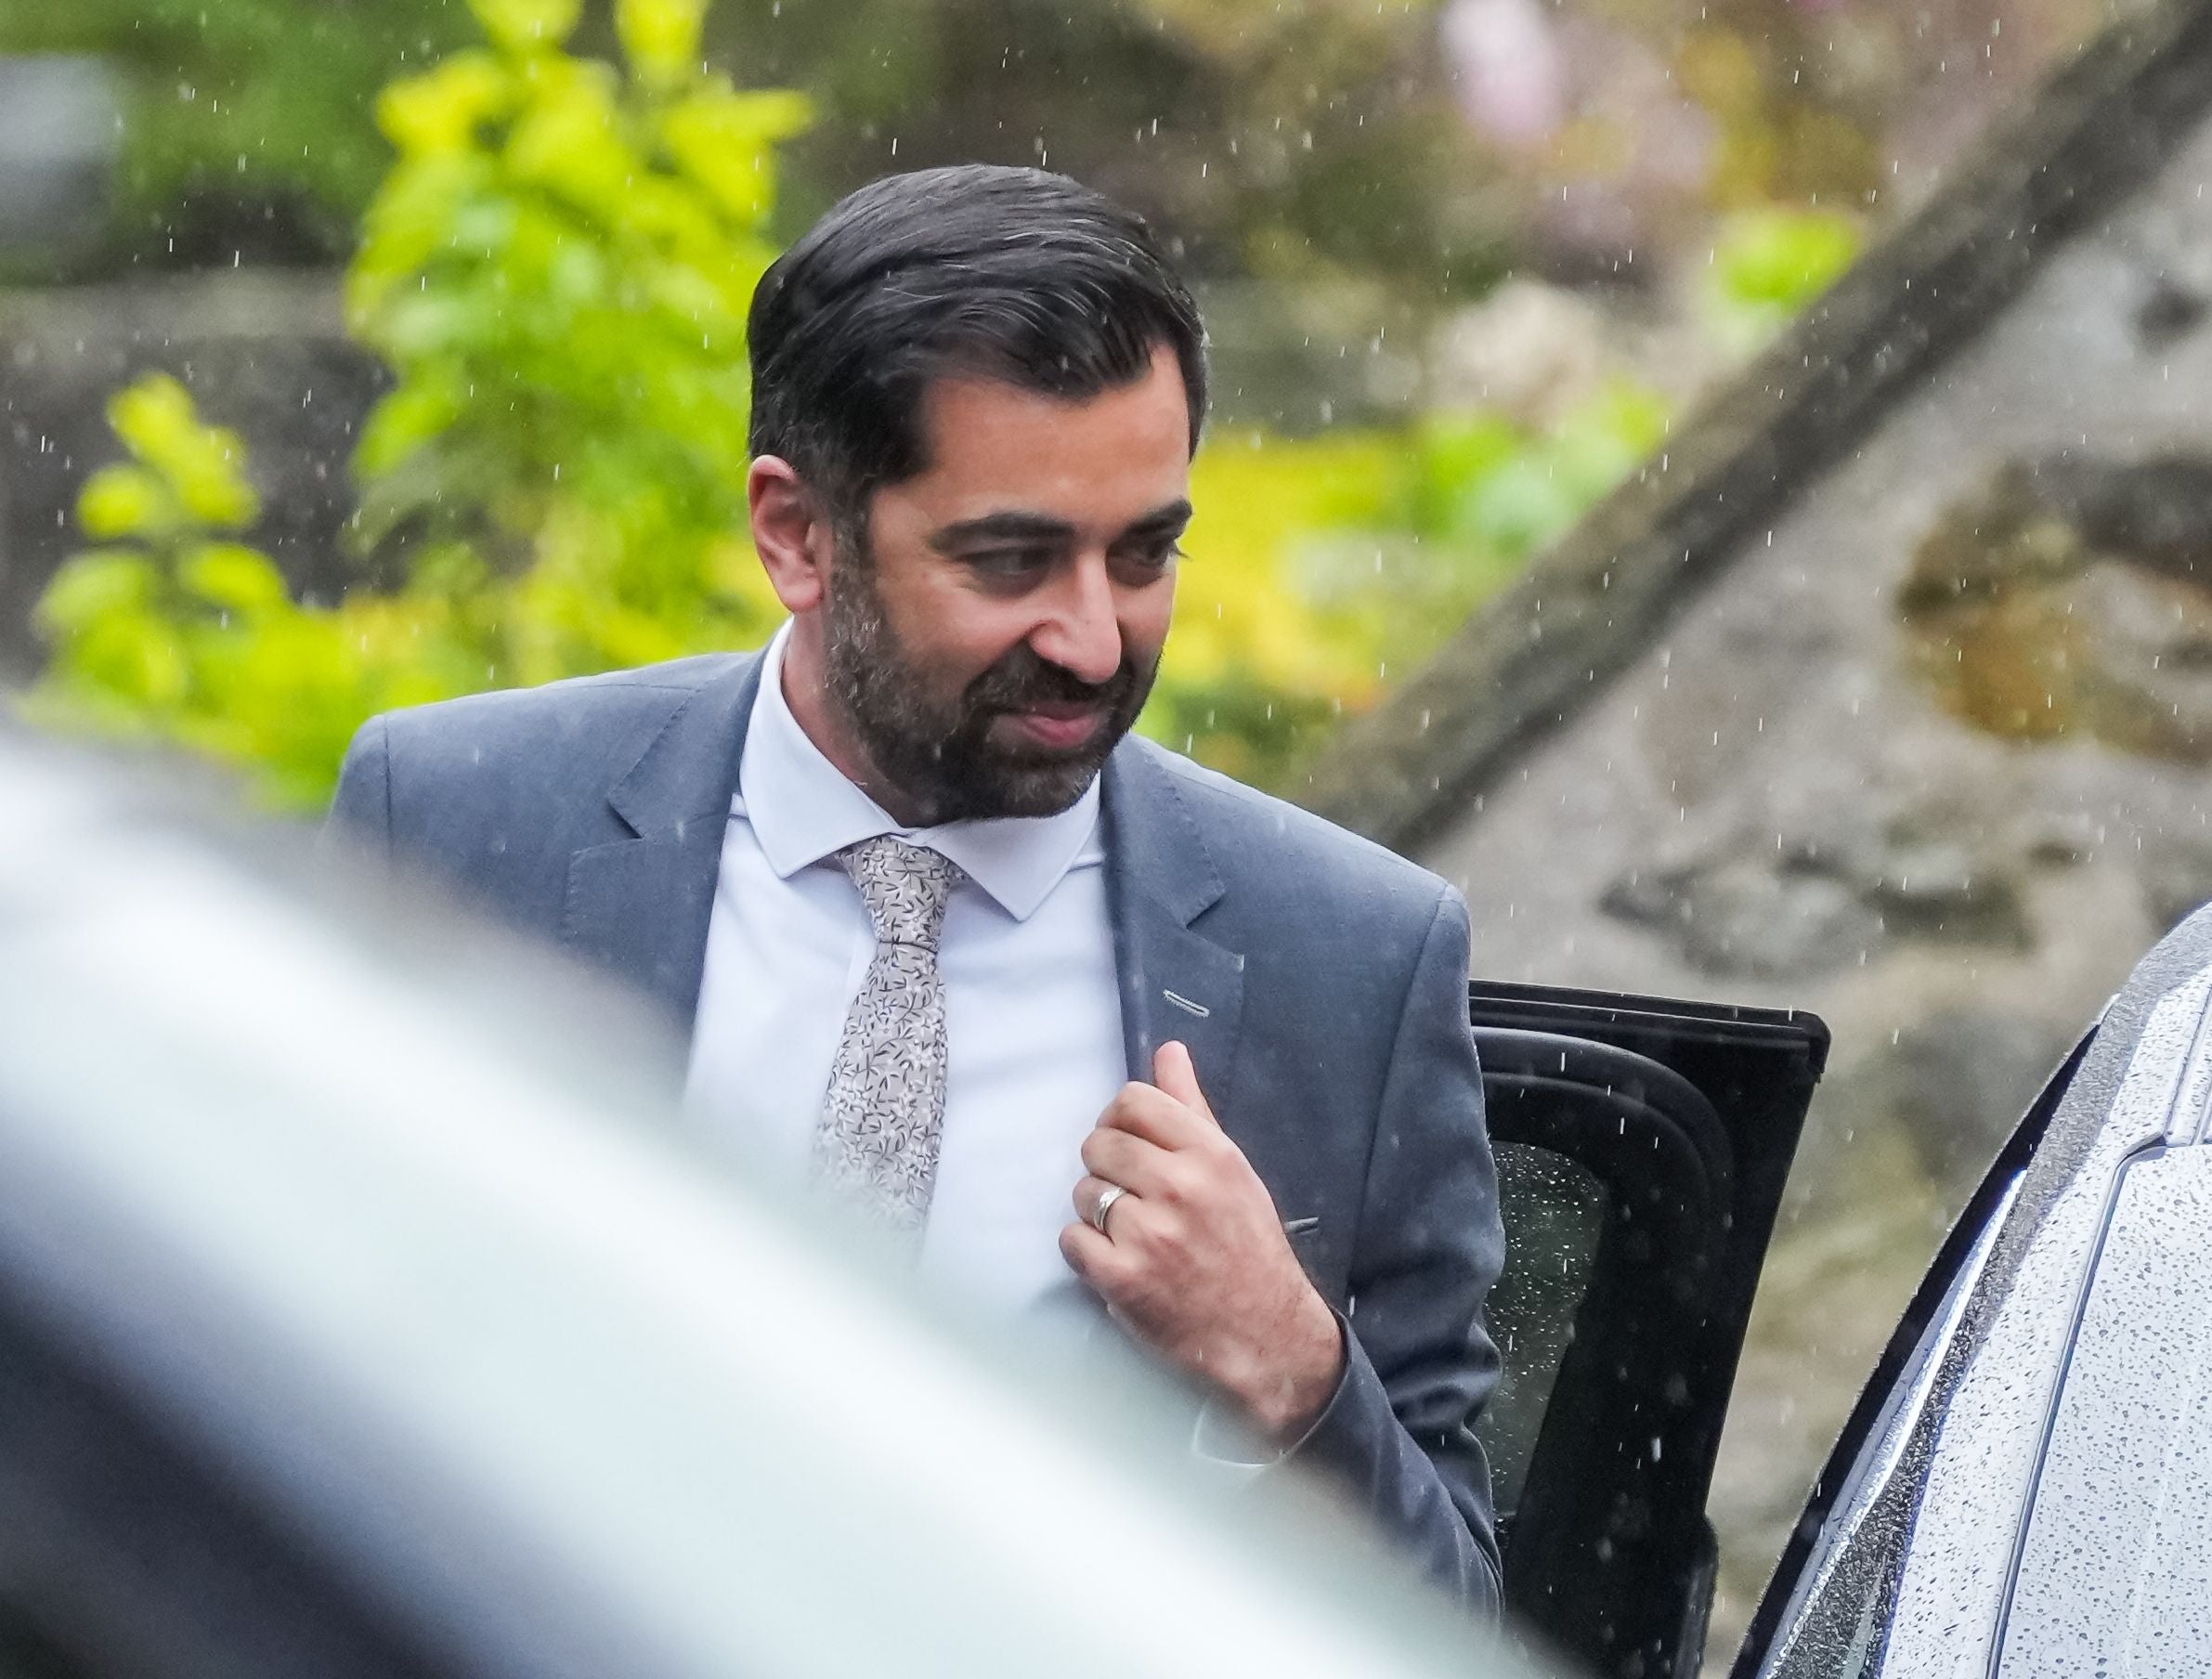 Humza Yousaf vowed last week to fight and win a vote of no-confidence in his leadership